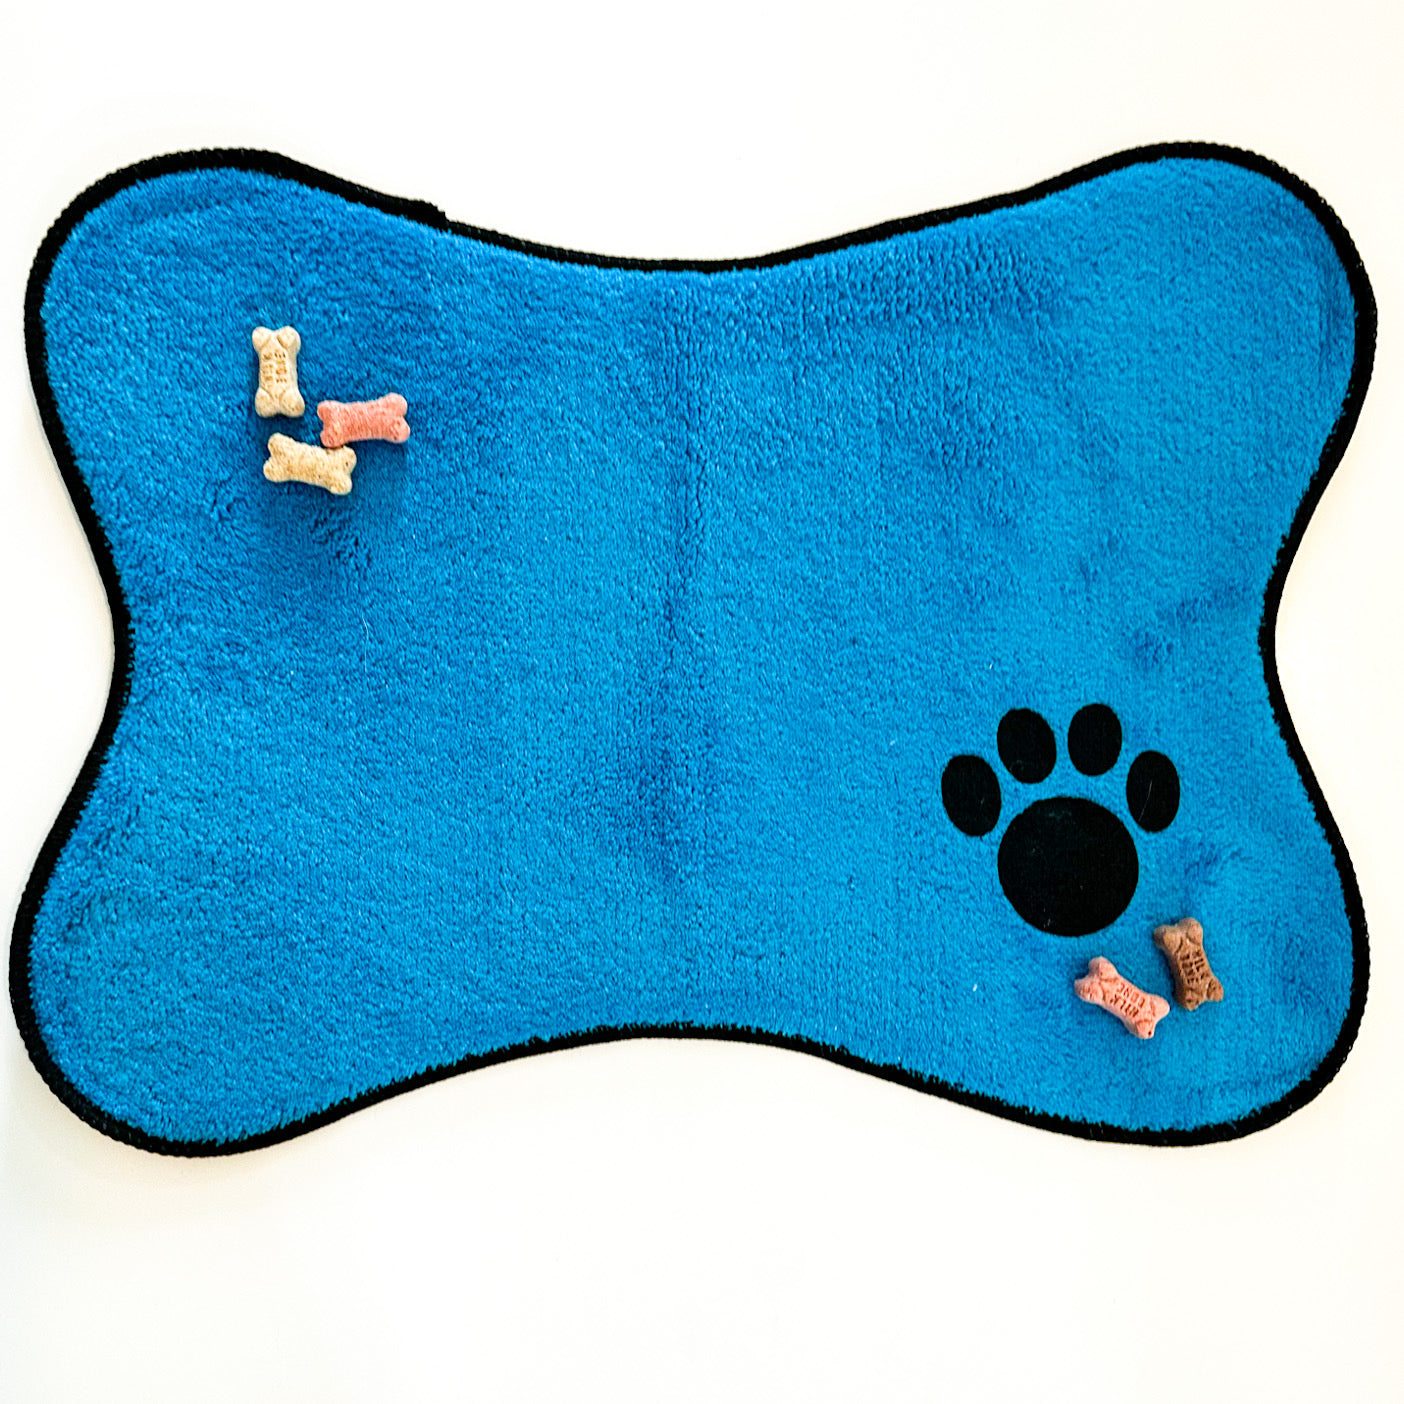 Pet Bowl Mat for Dog Owners, Funny Decorative Design F-Cats, 16x24